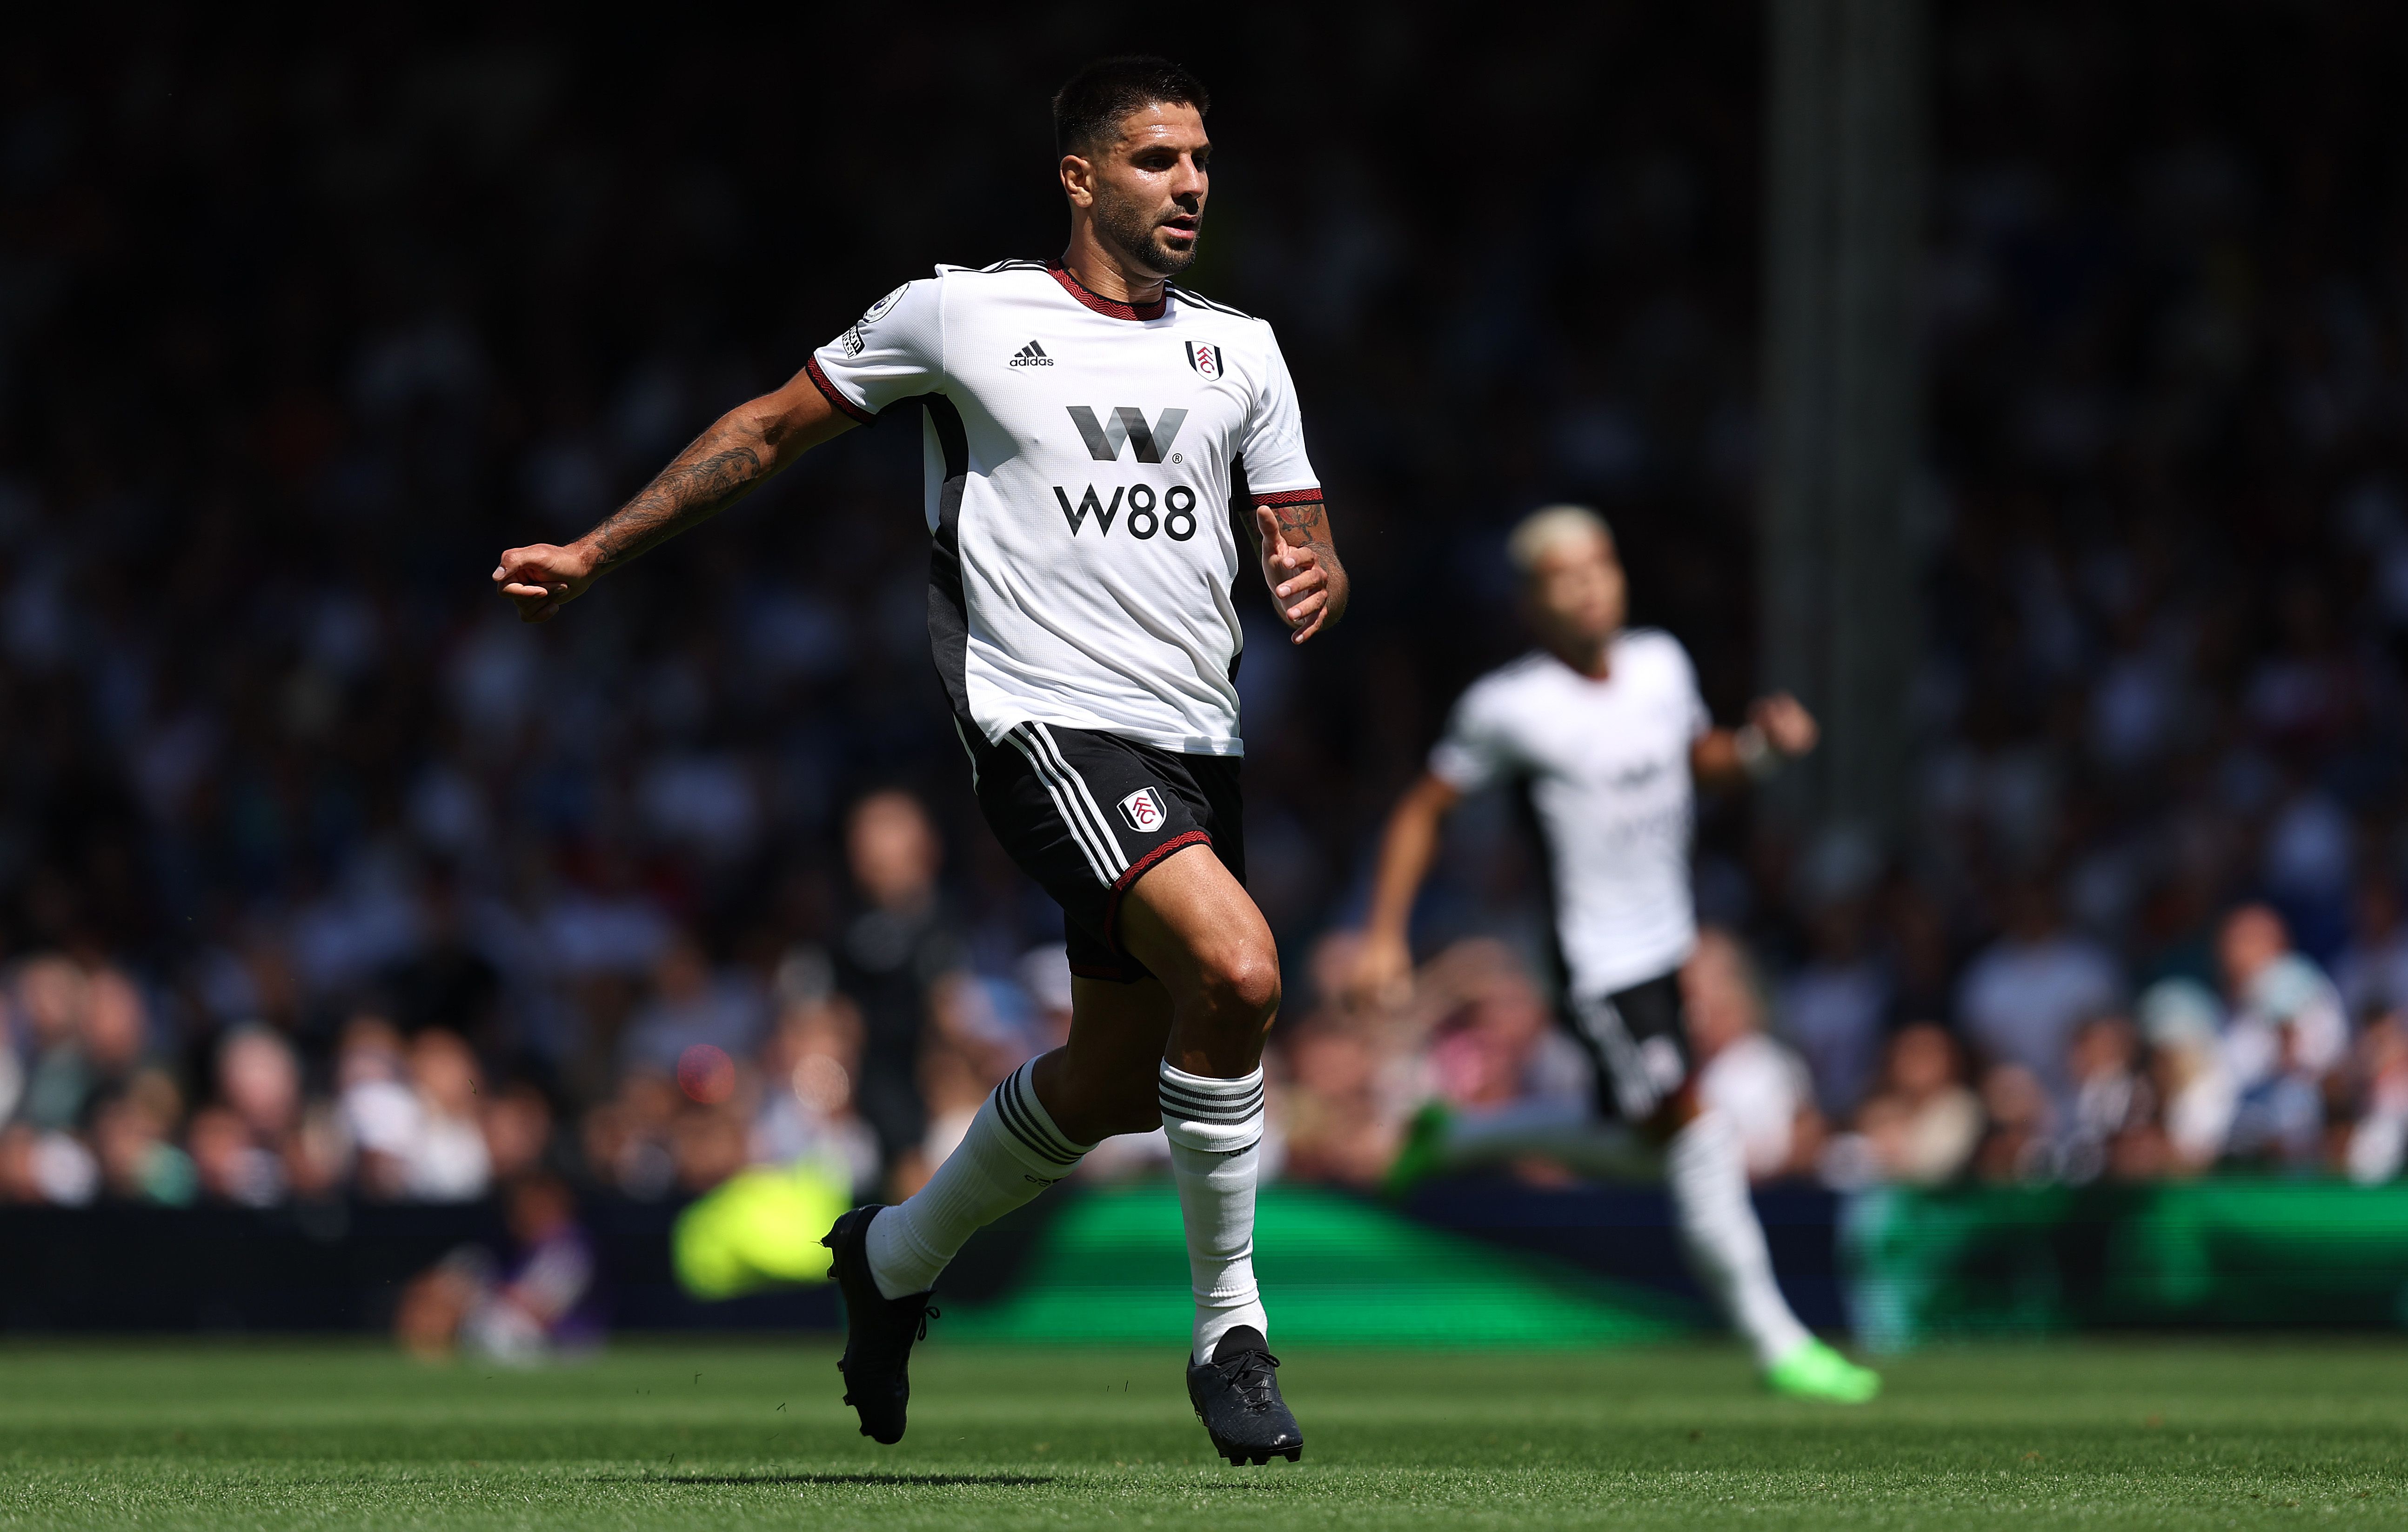  Aleksandar Mitrovic of Fulham looks on during the Premier League match